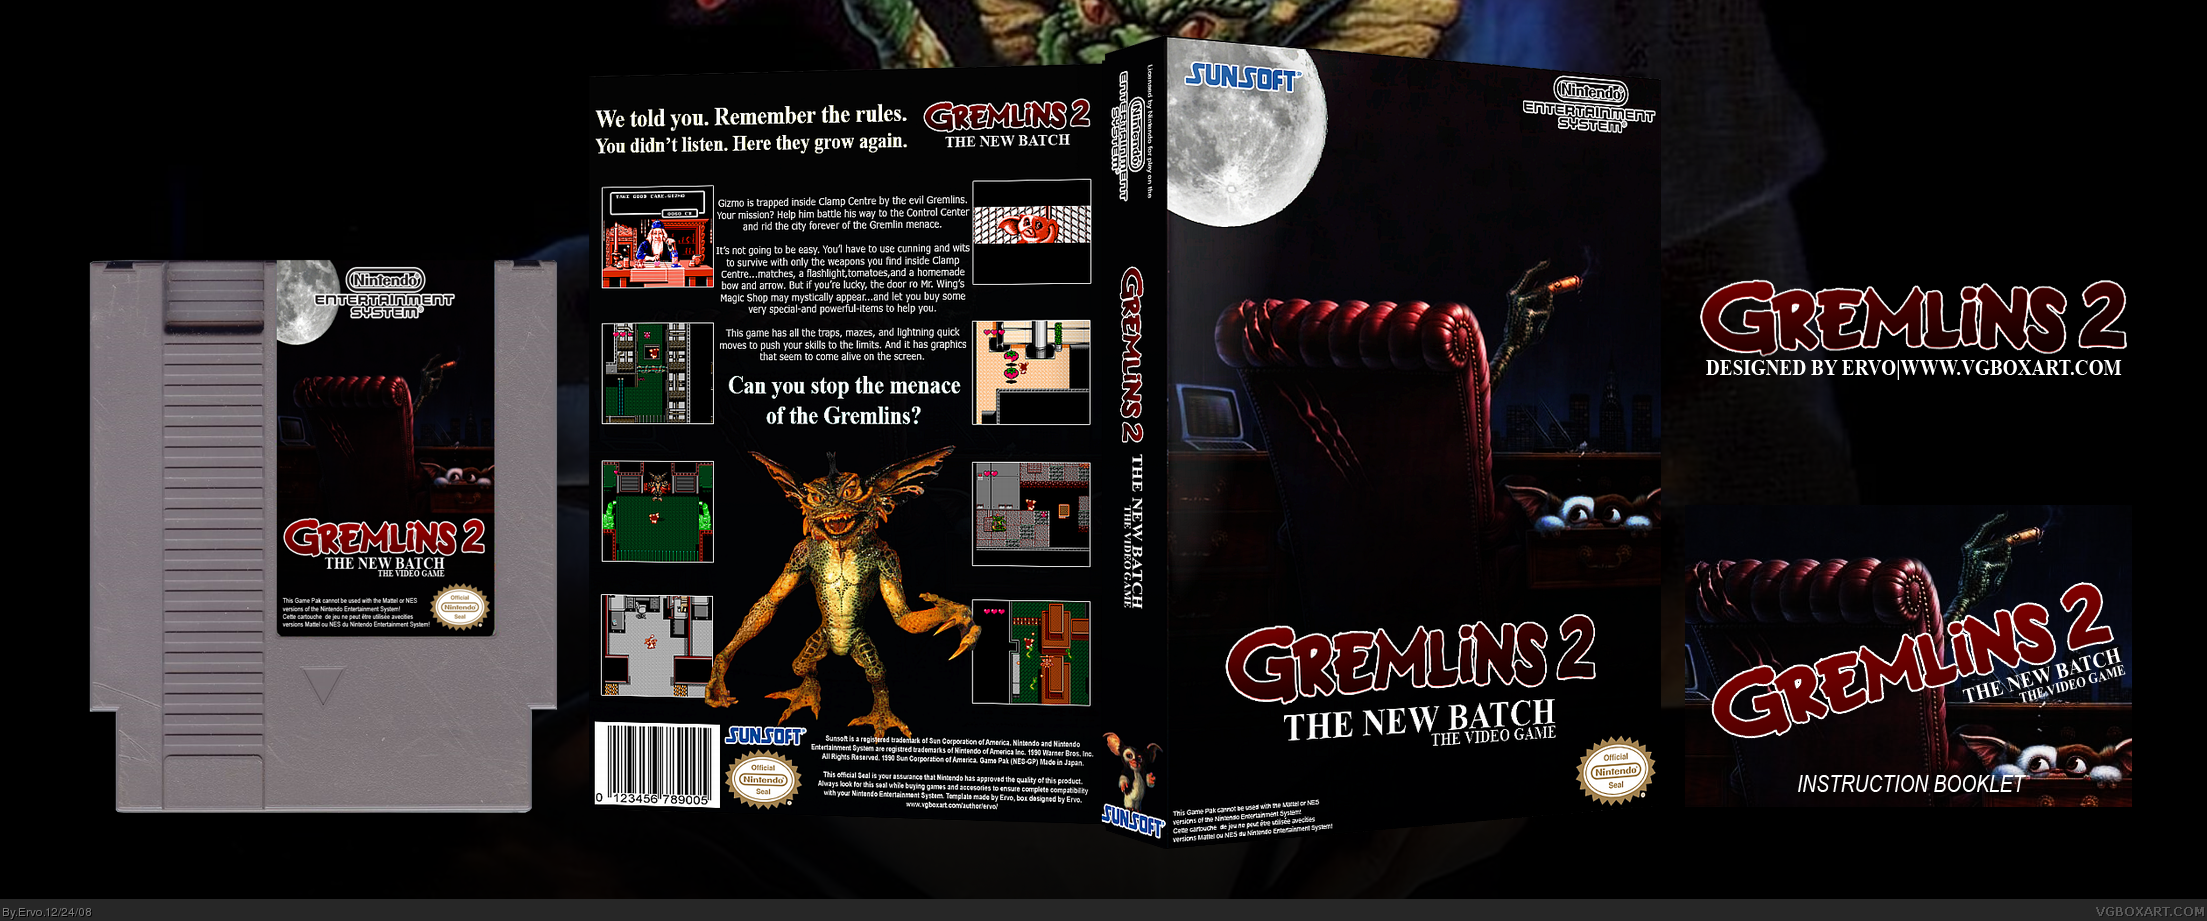 Gremlins 2: The New Batch box cover